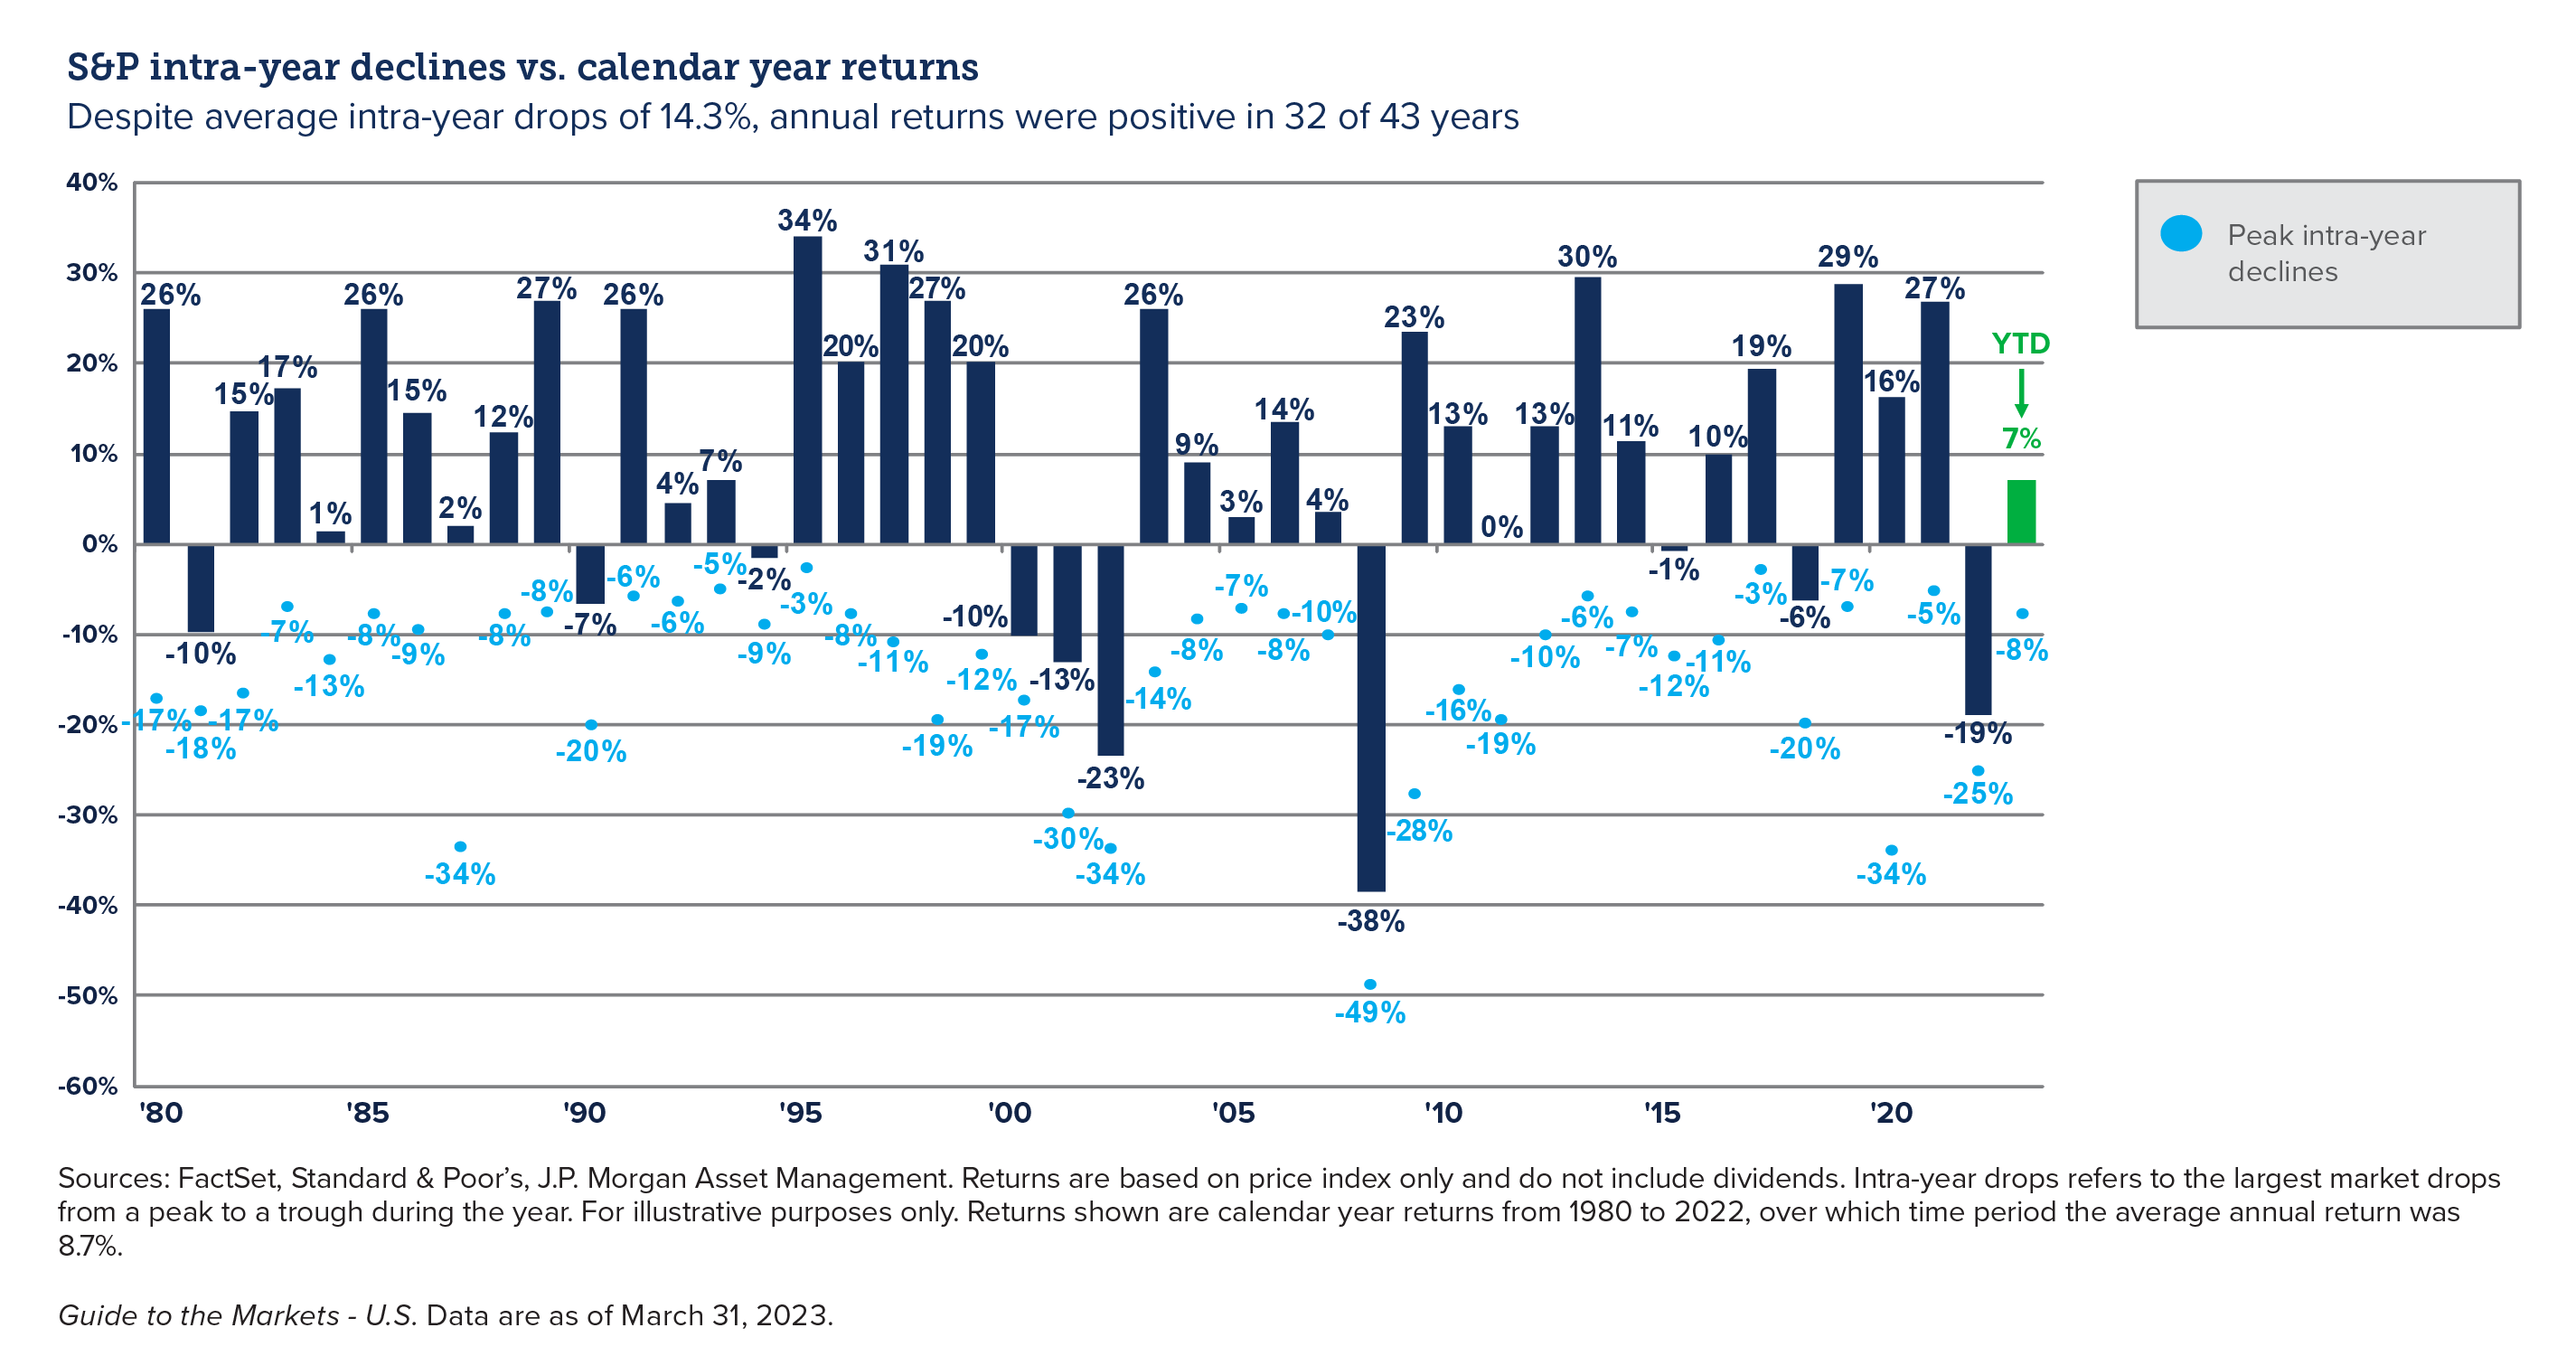 Graph comparing S&P intra-year declines against calendar year returns - INTRUST 2023 Q1 Perspectives